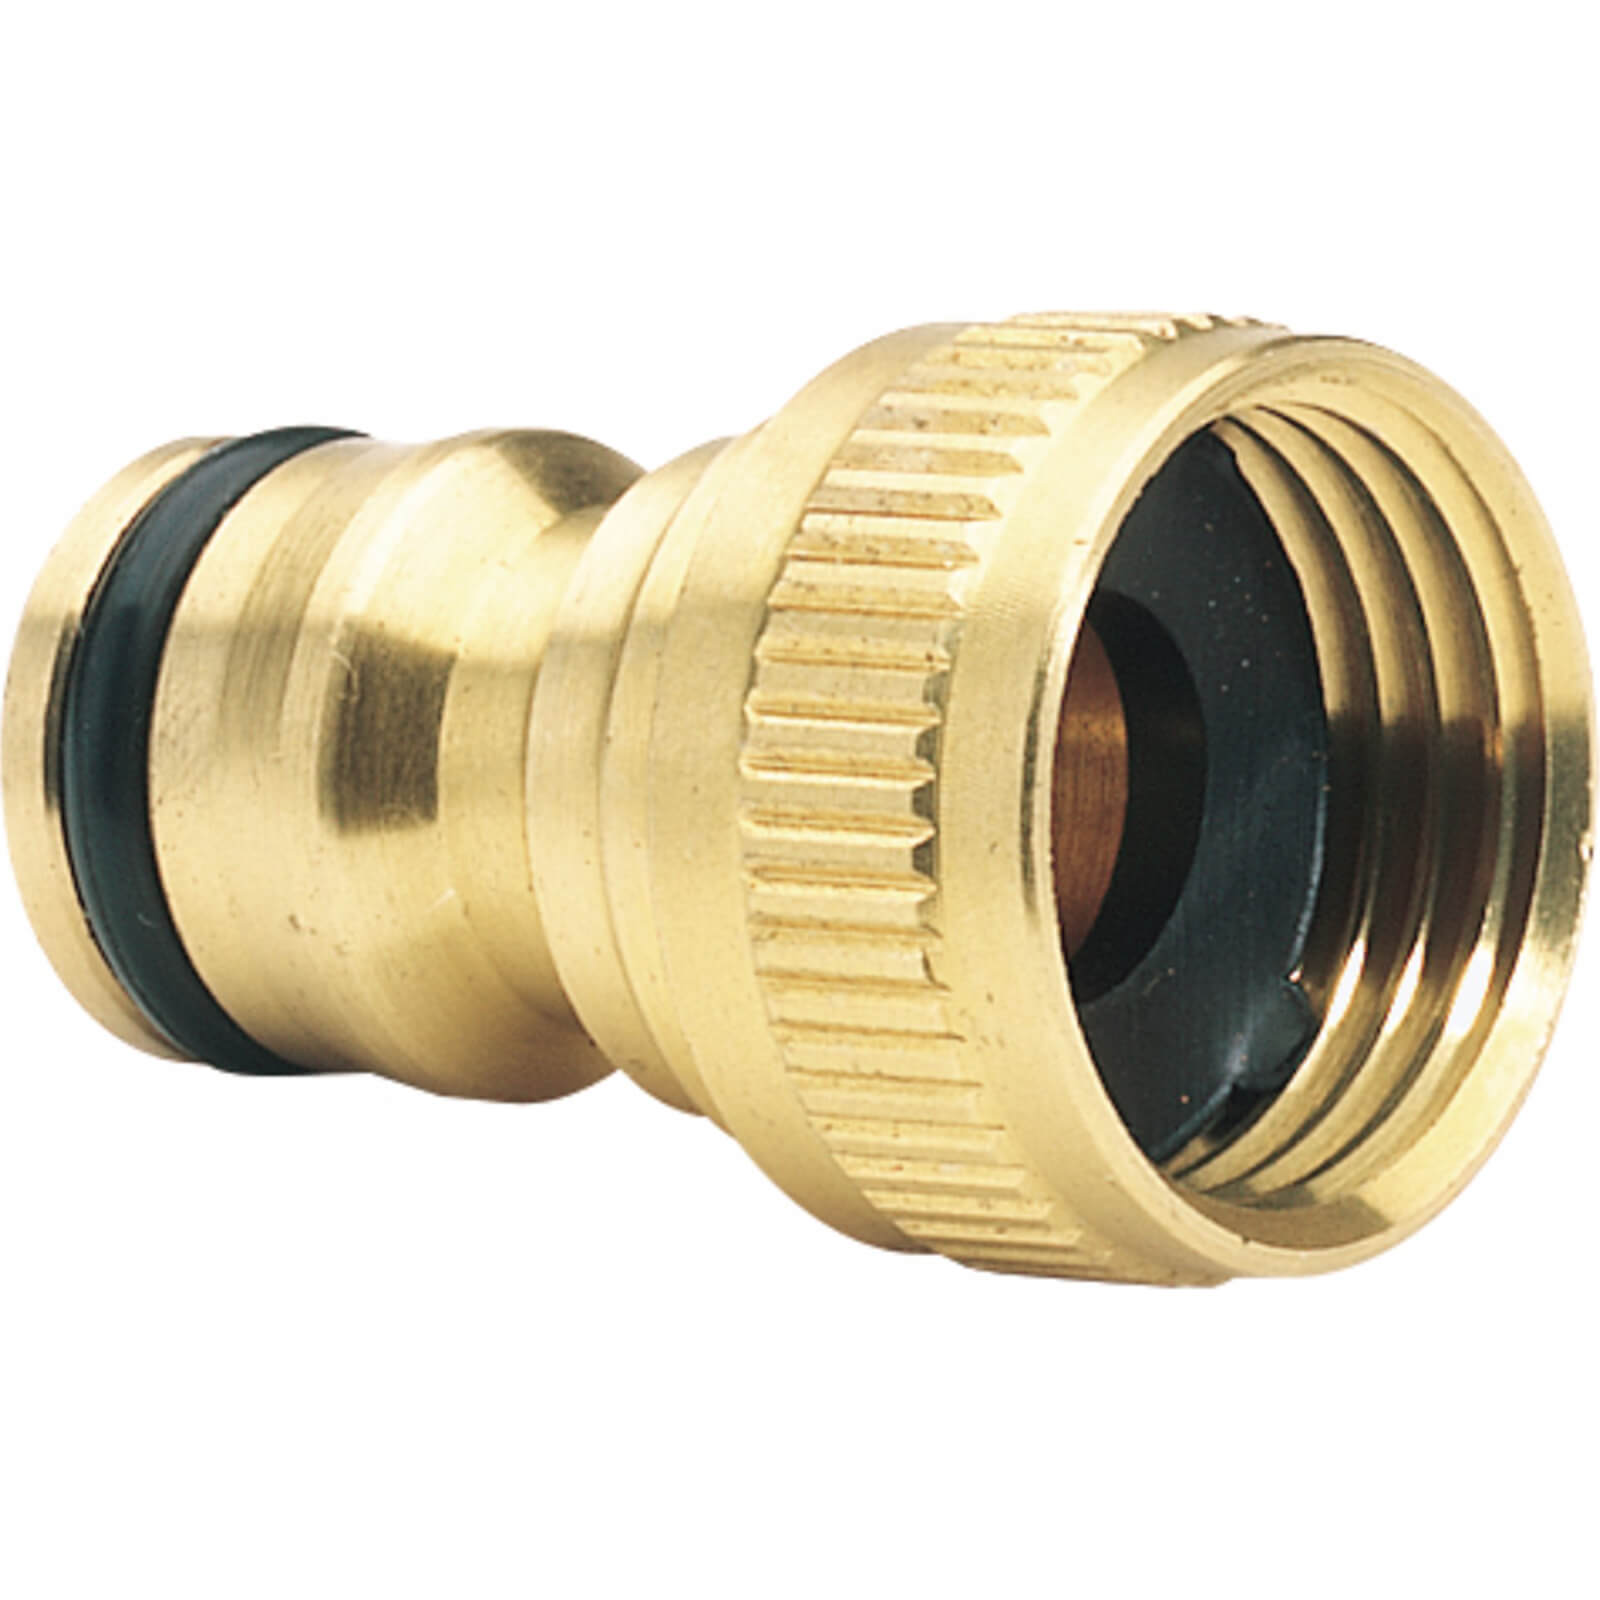 Draper Expert Brass Hose Pipe Tap Connector 1/2" / 12.5mm Pack of 1